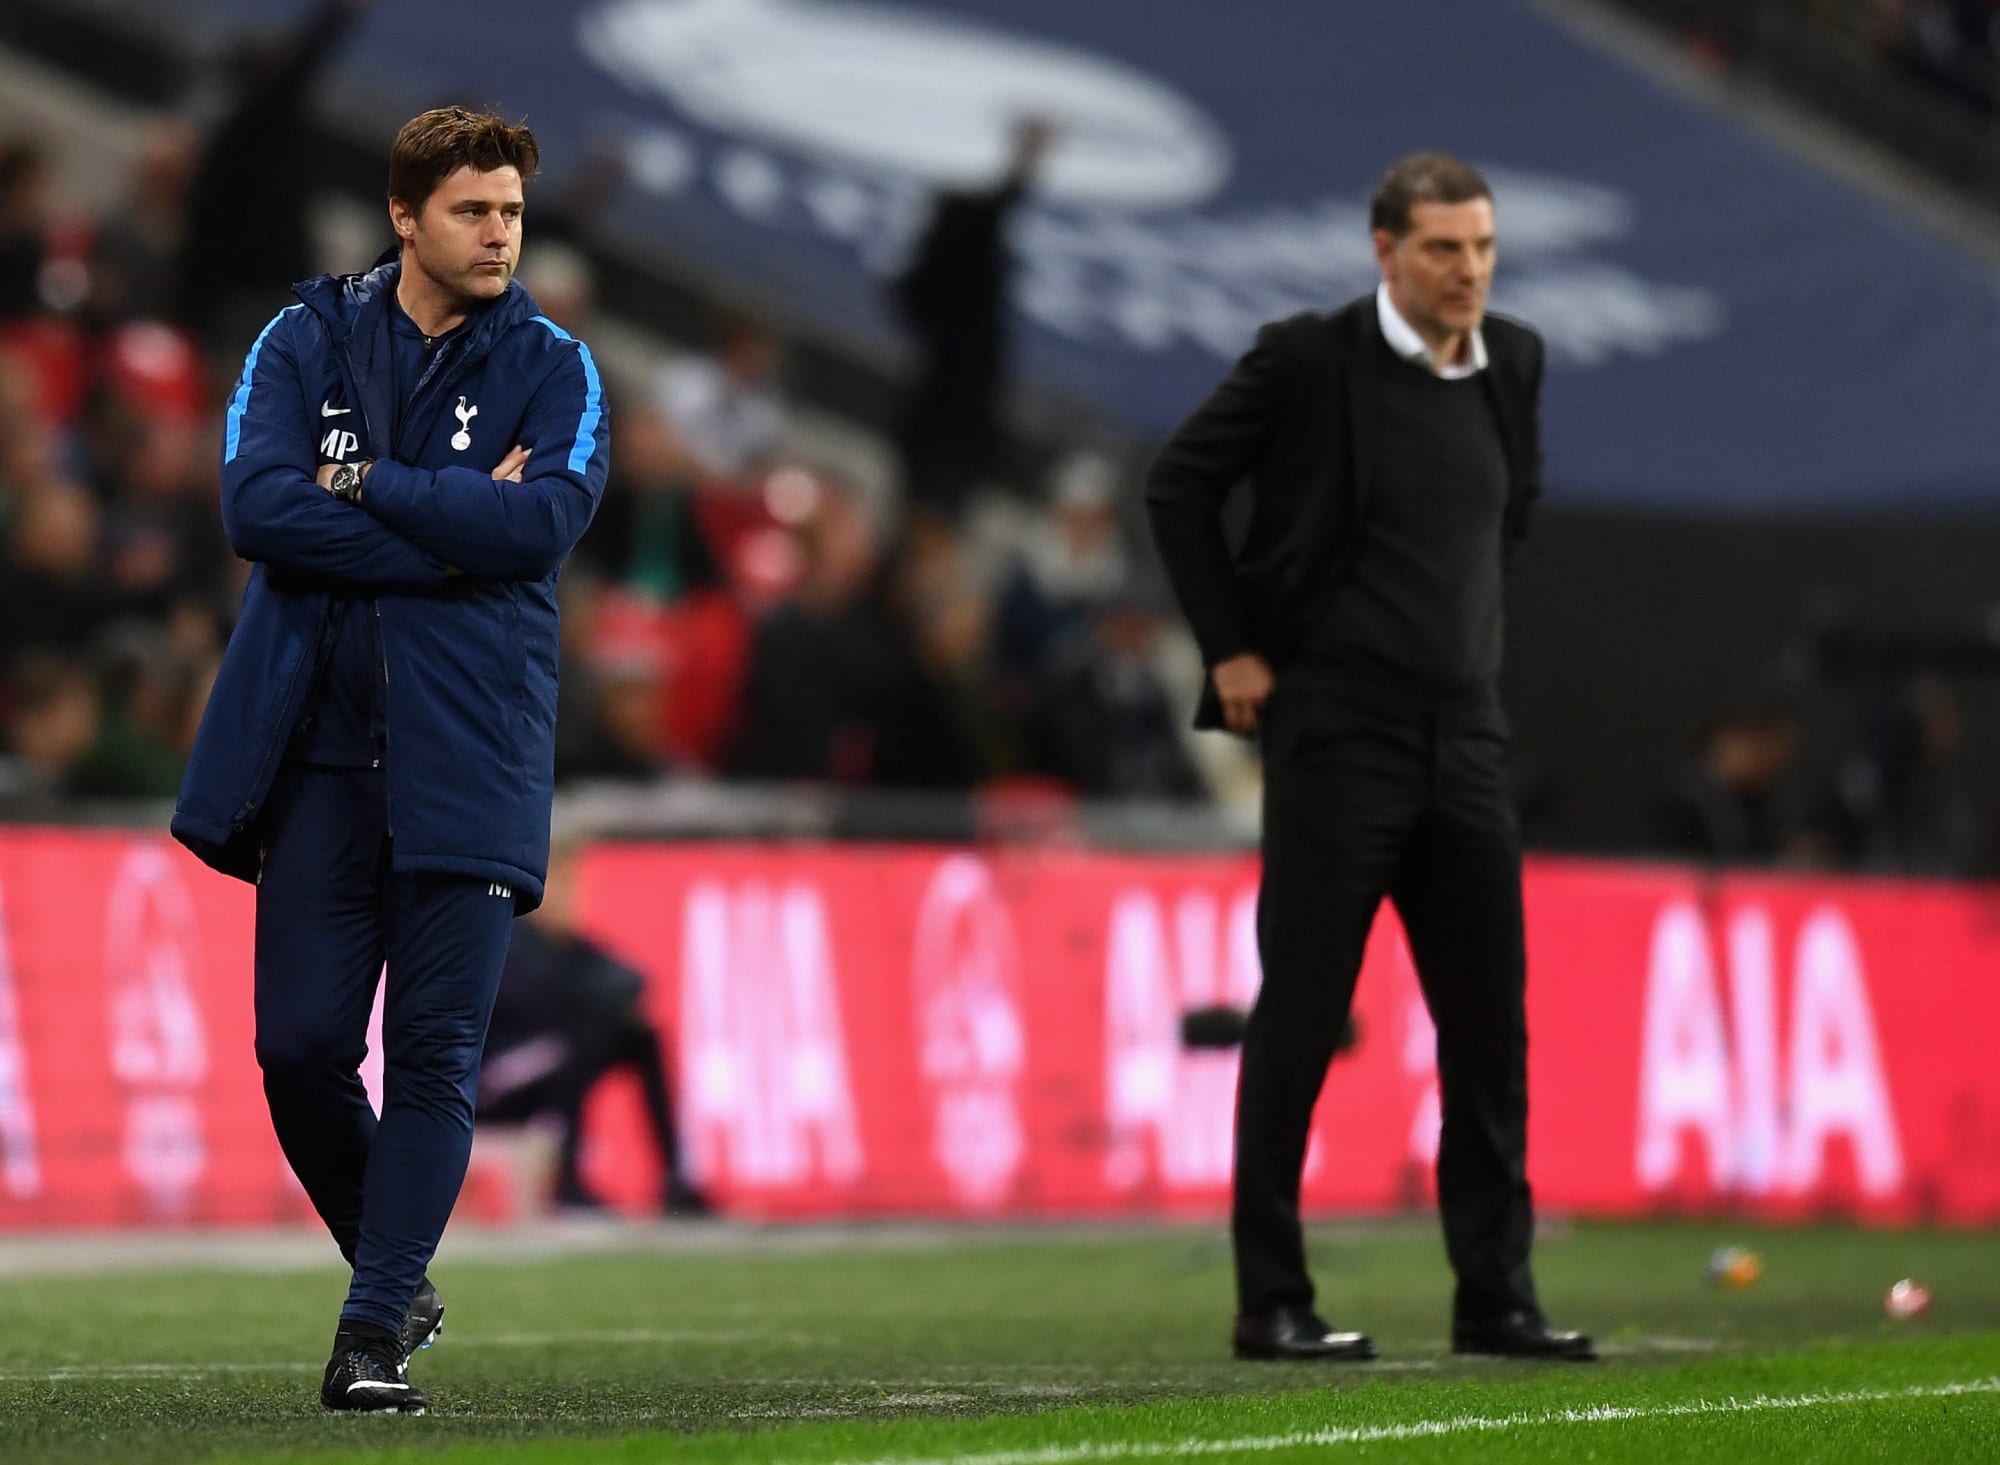 Spurs concede three goals in 15 minutes, eliminated from Carabao Cup